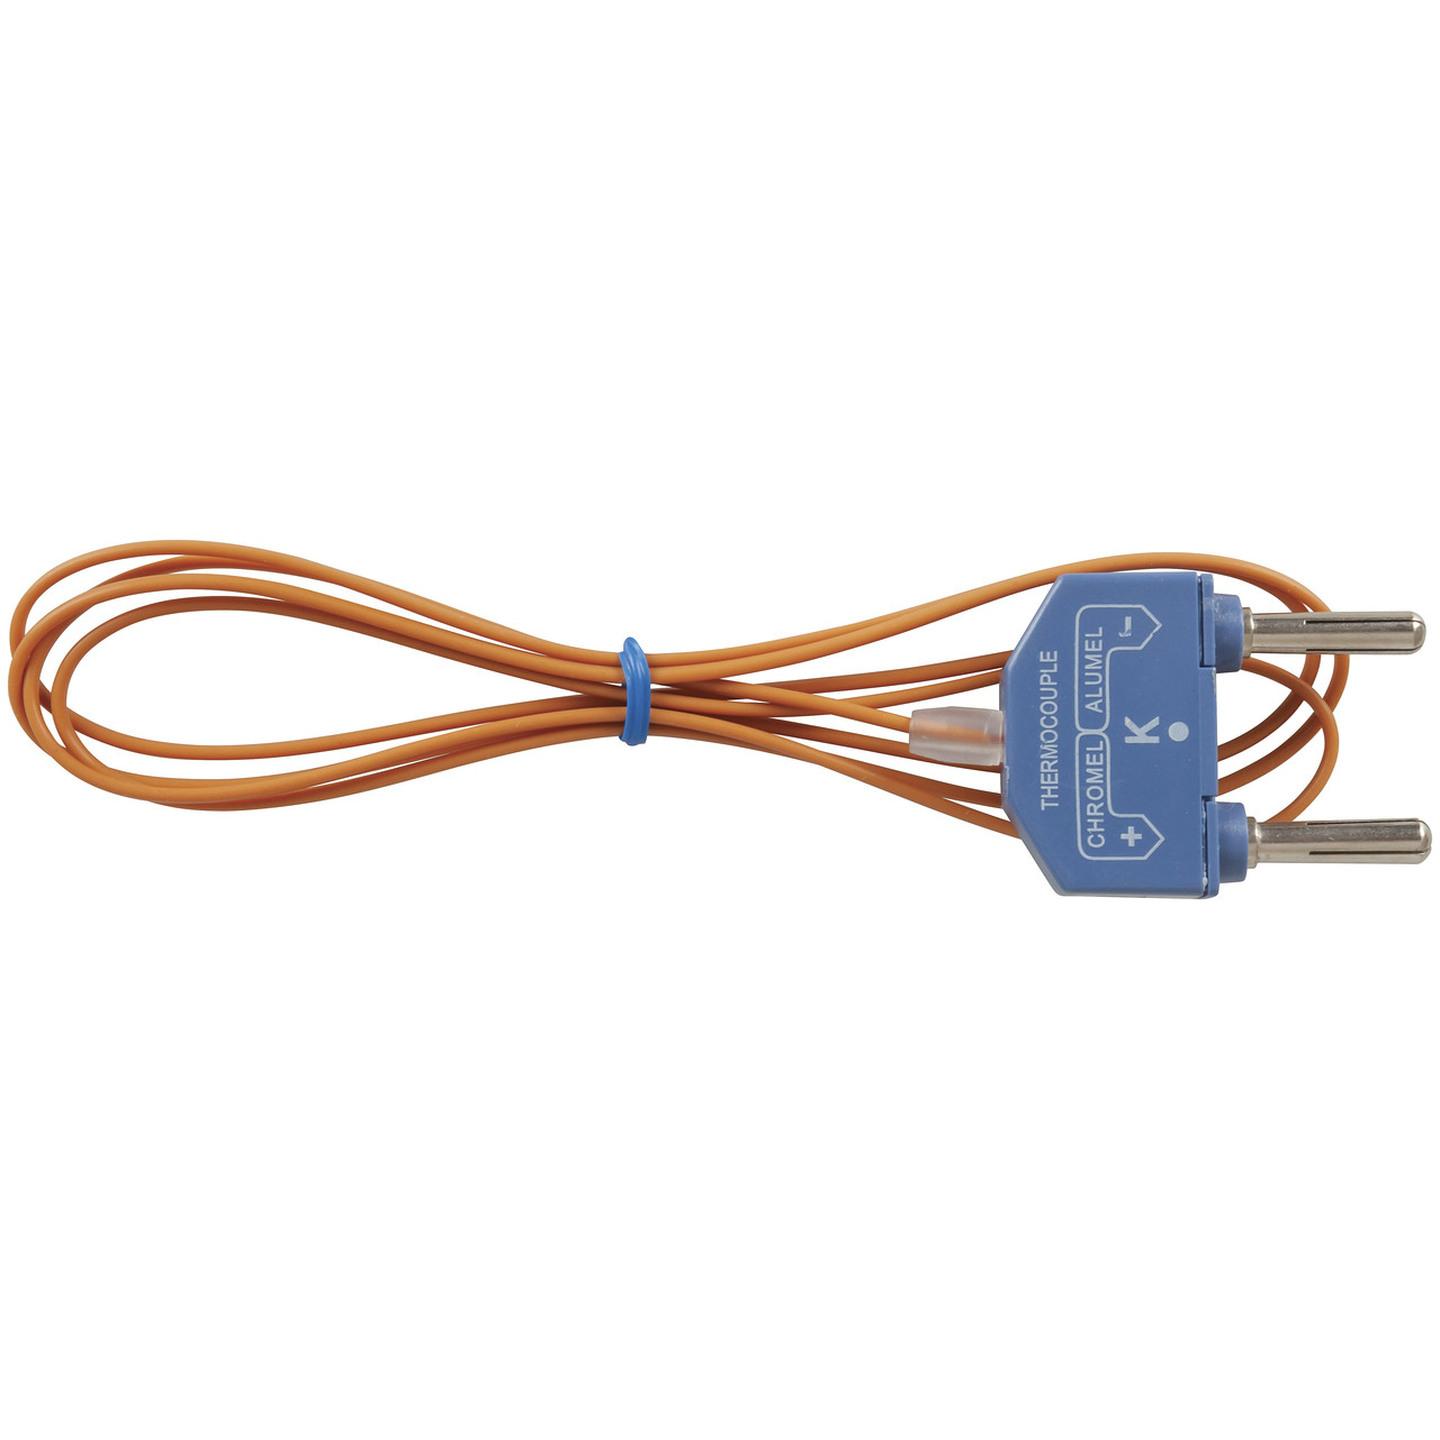 Wire Type Thermocouple with Twin Banana Plugs